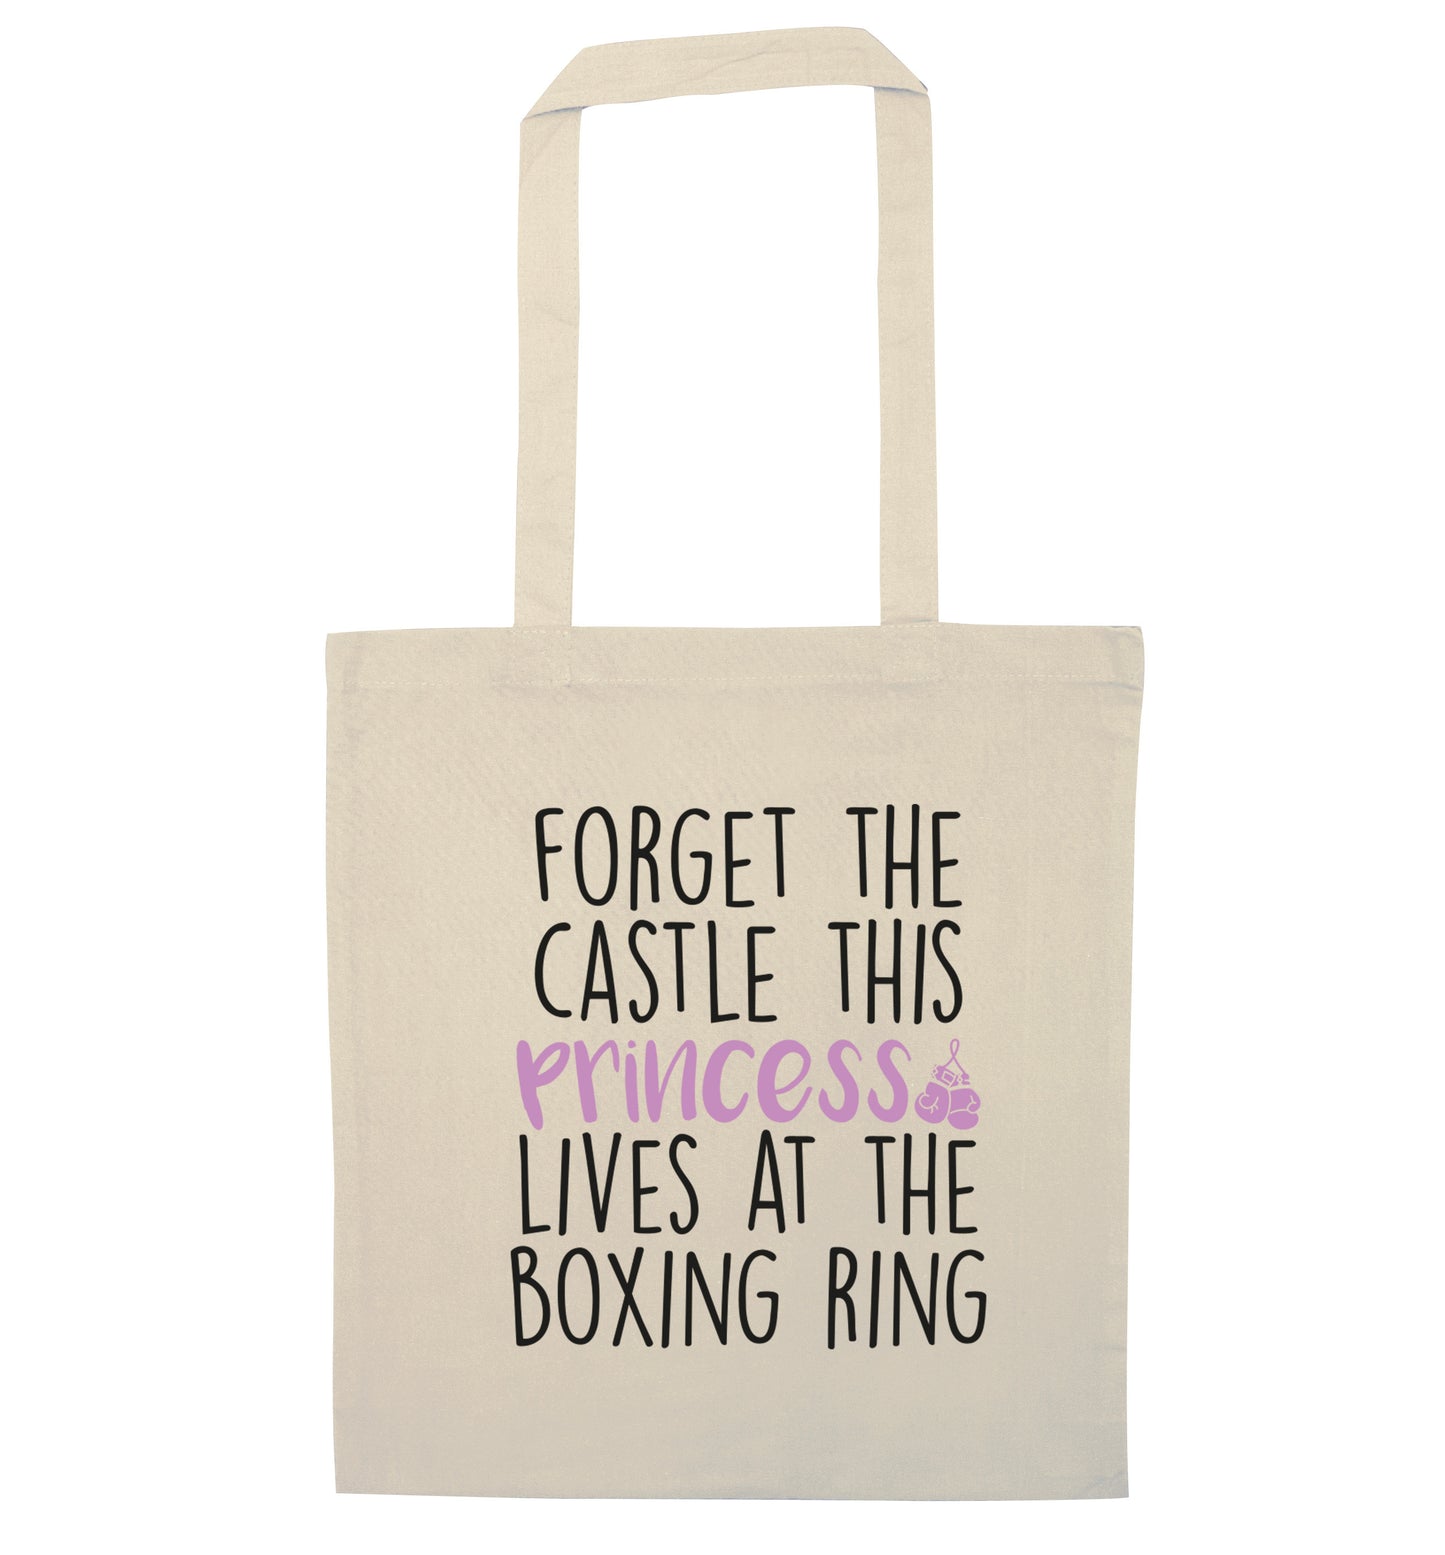 Forget the castle this princess lives at the boxing ring natural tote bag